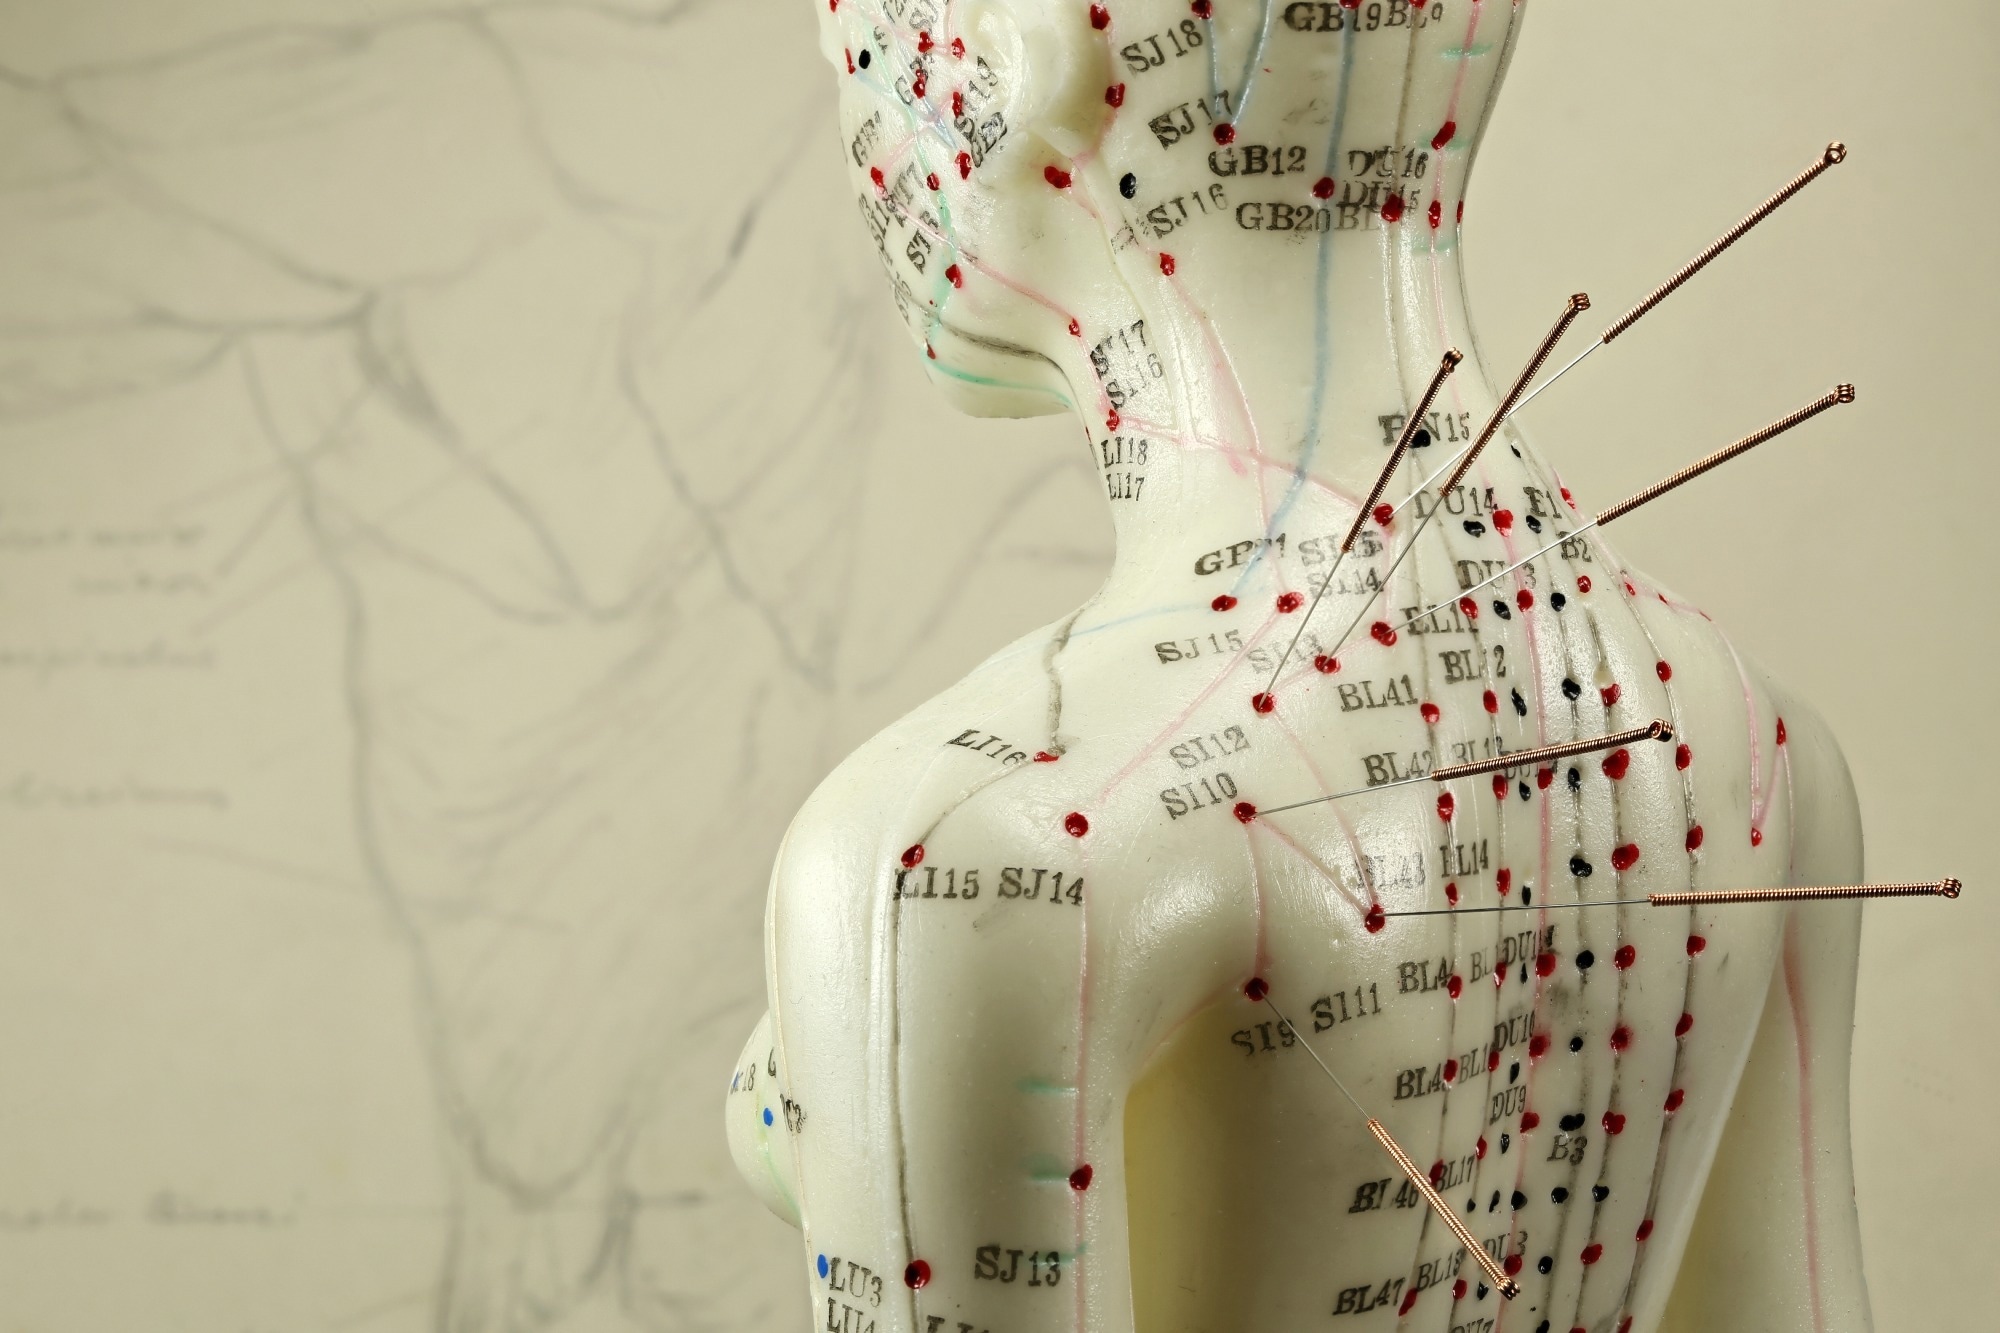 Study: Acupuncture vs Massage for Pain in Patients Living With Advanced Cancer. Image Credit: Bjoern Wylezich / Shutterstock